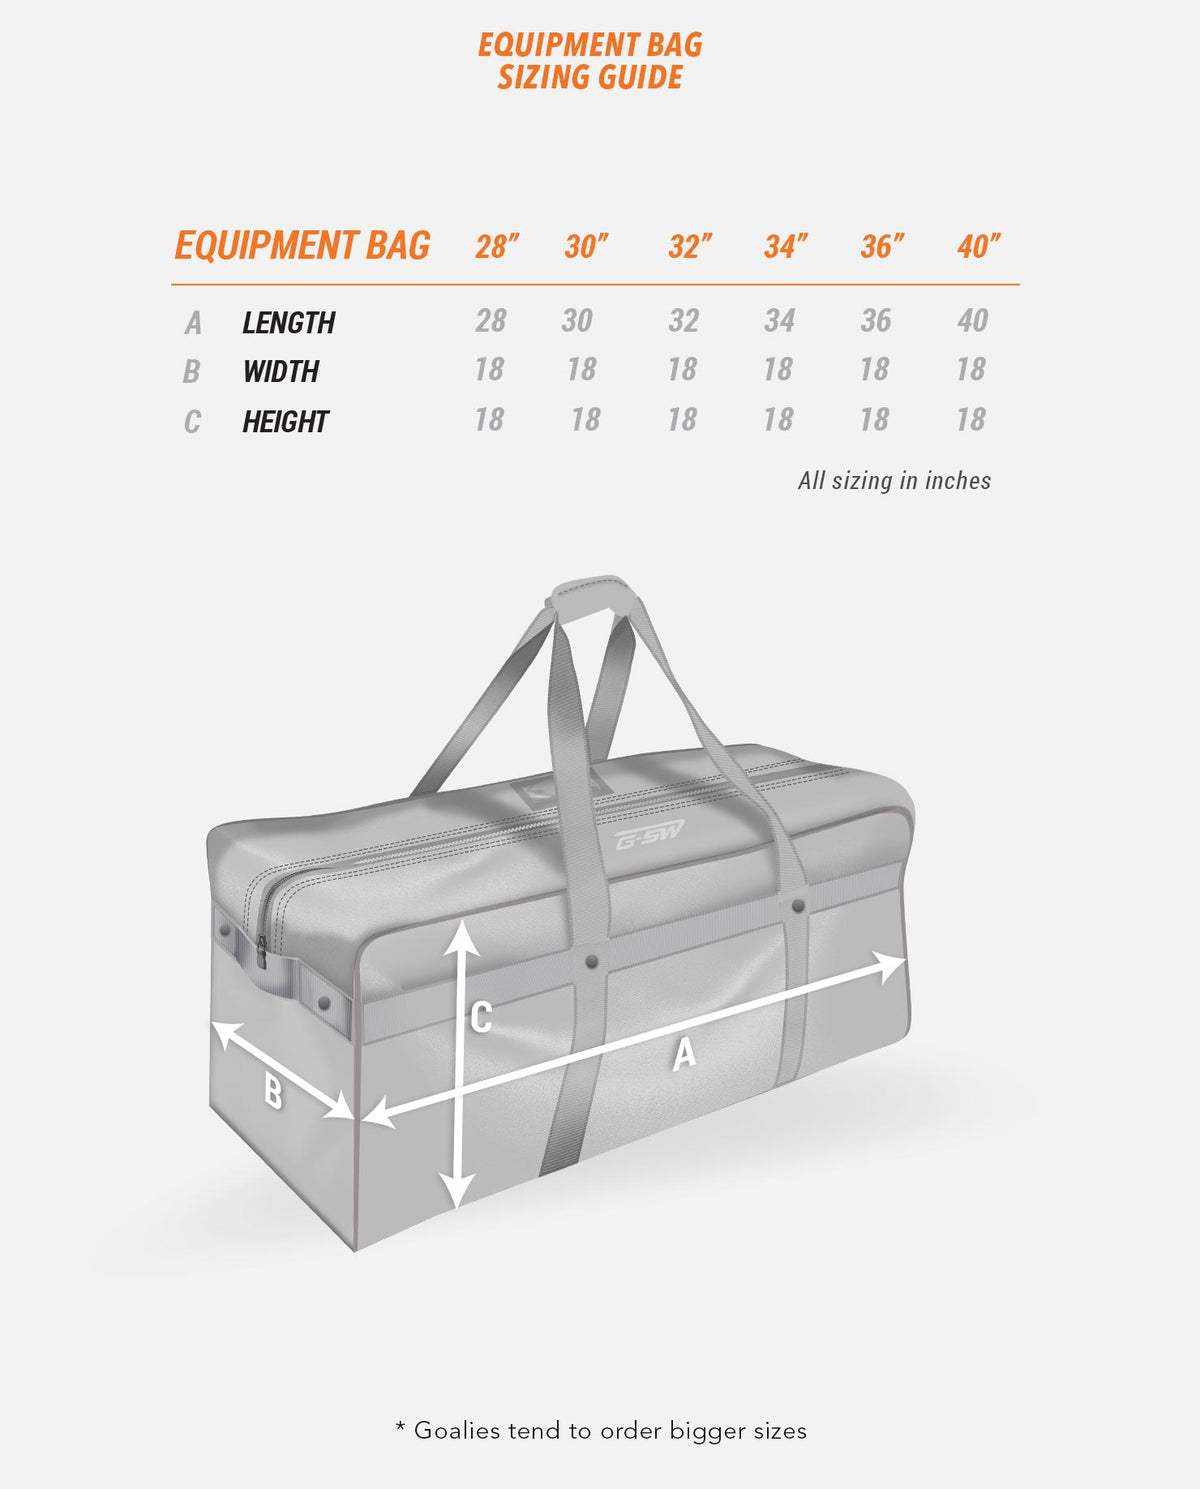 Equipment Bag Sizing Guide